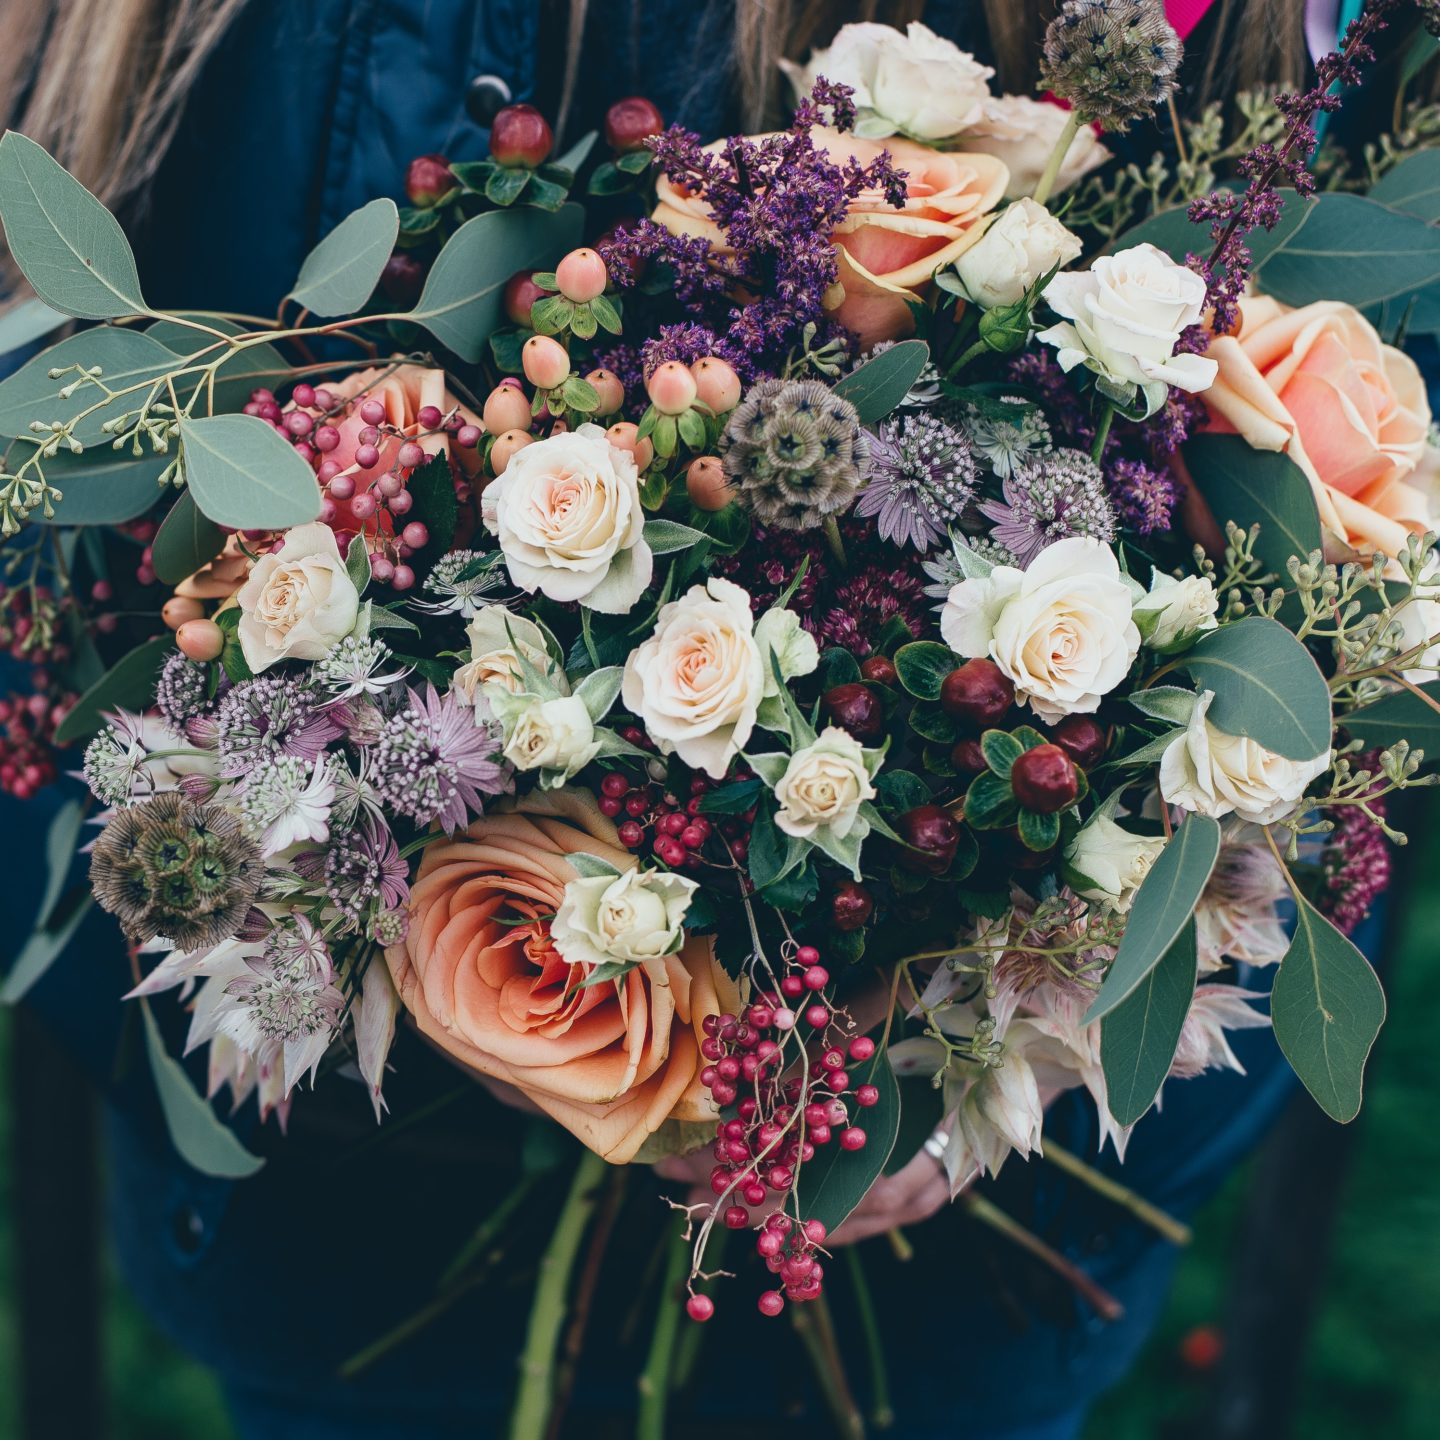 Creative Winter Wedding Flowers For Your Wedding Day